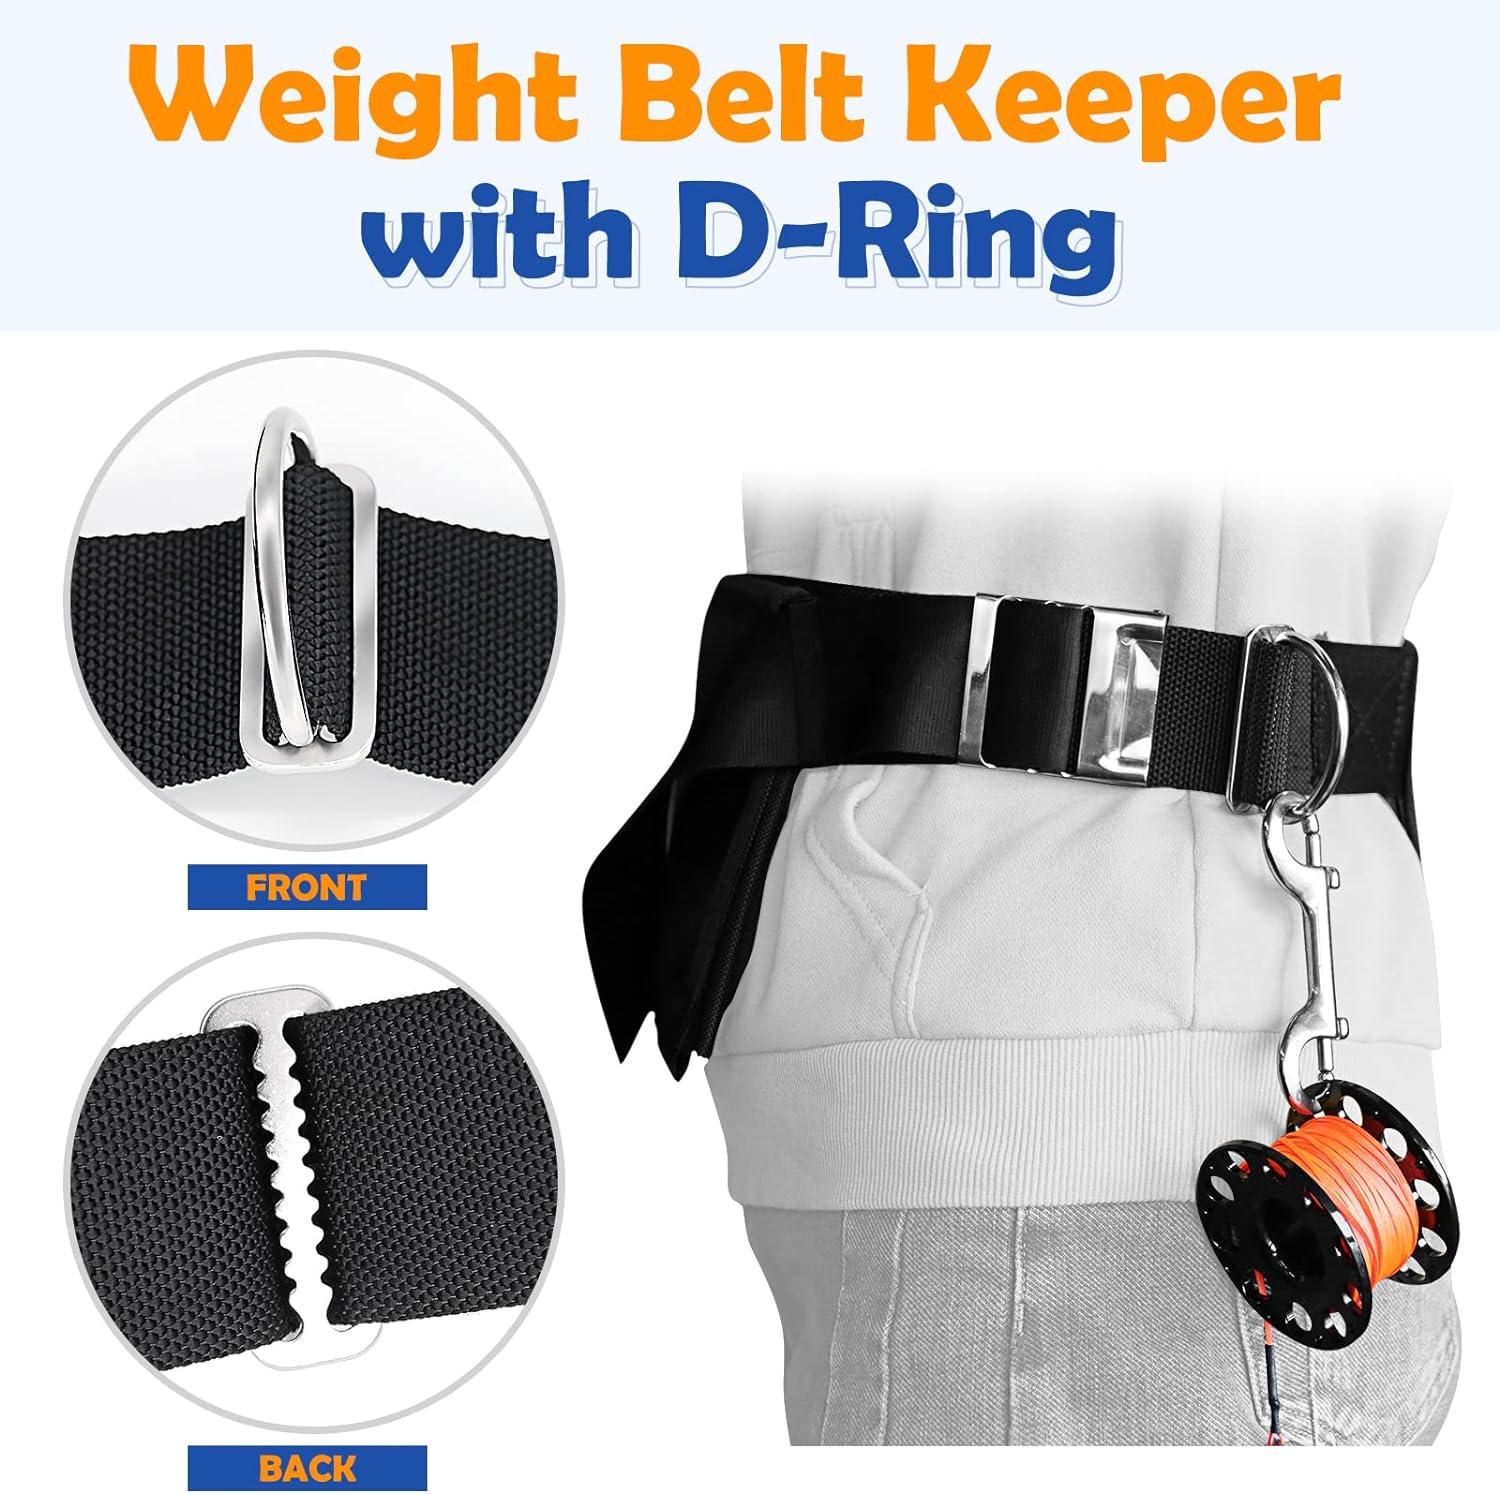 Dawitrly 2Pack Weight Belt Keeper 5cm/2'' Stainless Steel Serrated Scuba  Diving Weight Belt Retainer Stopper with D Ring for Dive Gear and BCD  Accessories